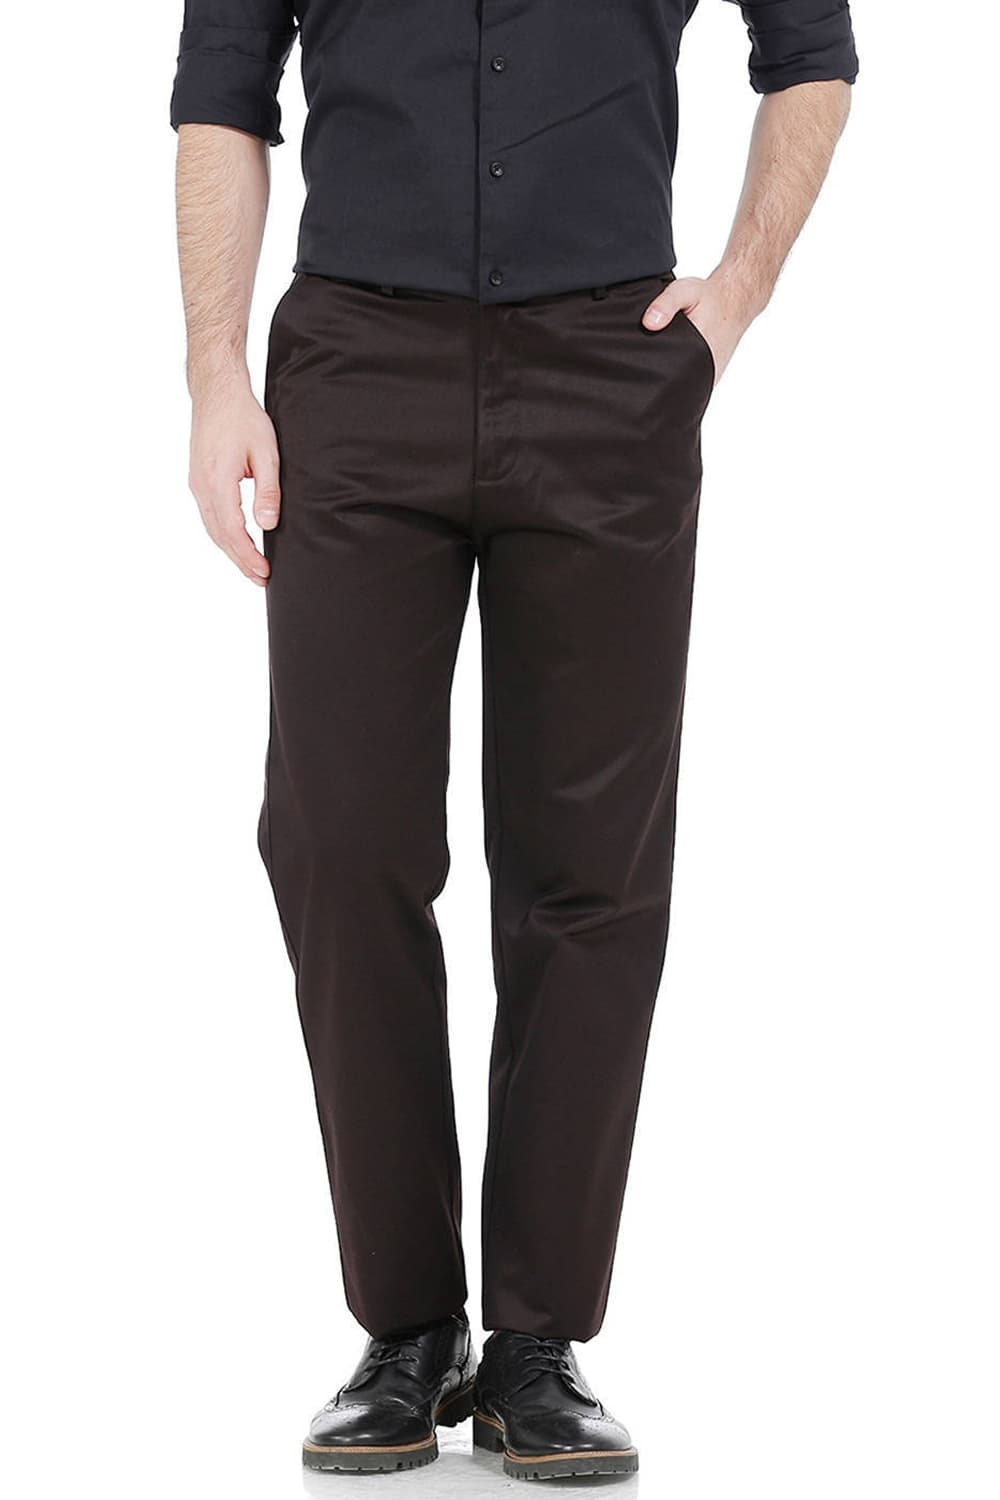 Basics | Basics Comfort Fit Coffee Satin Weave Poly Cotton Trousers